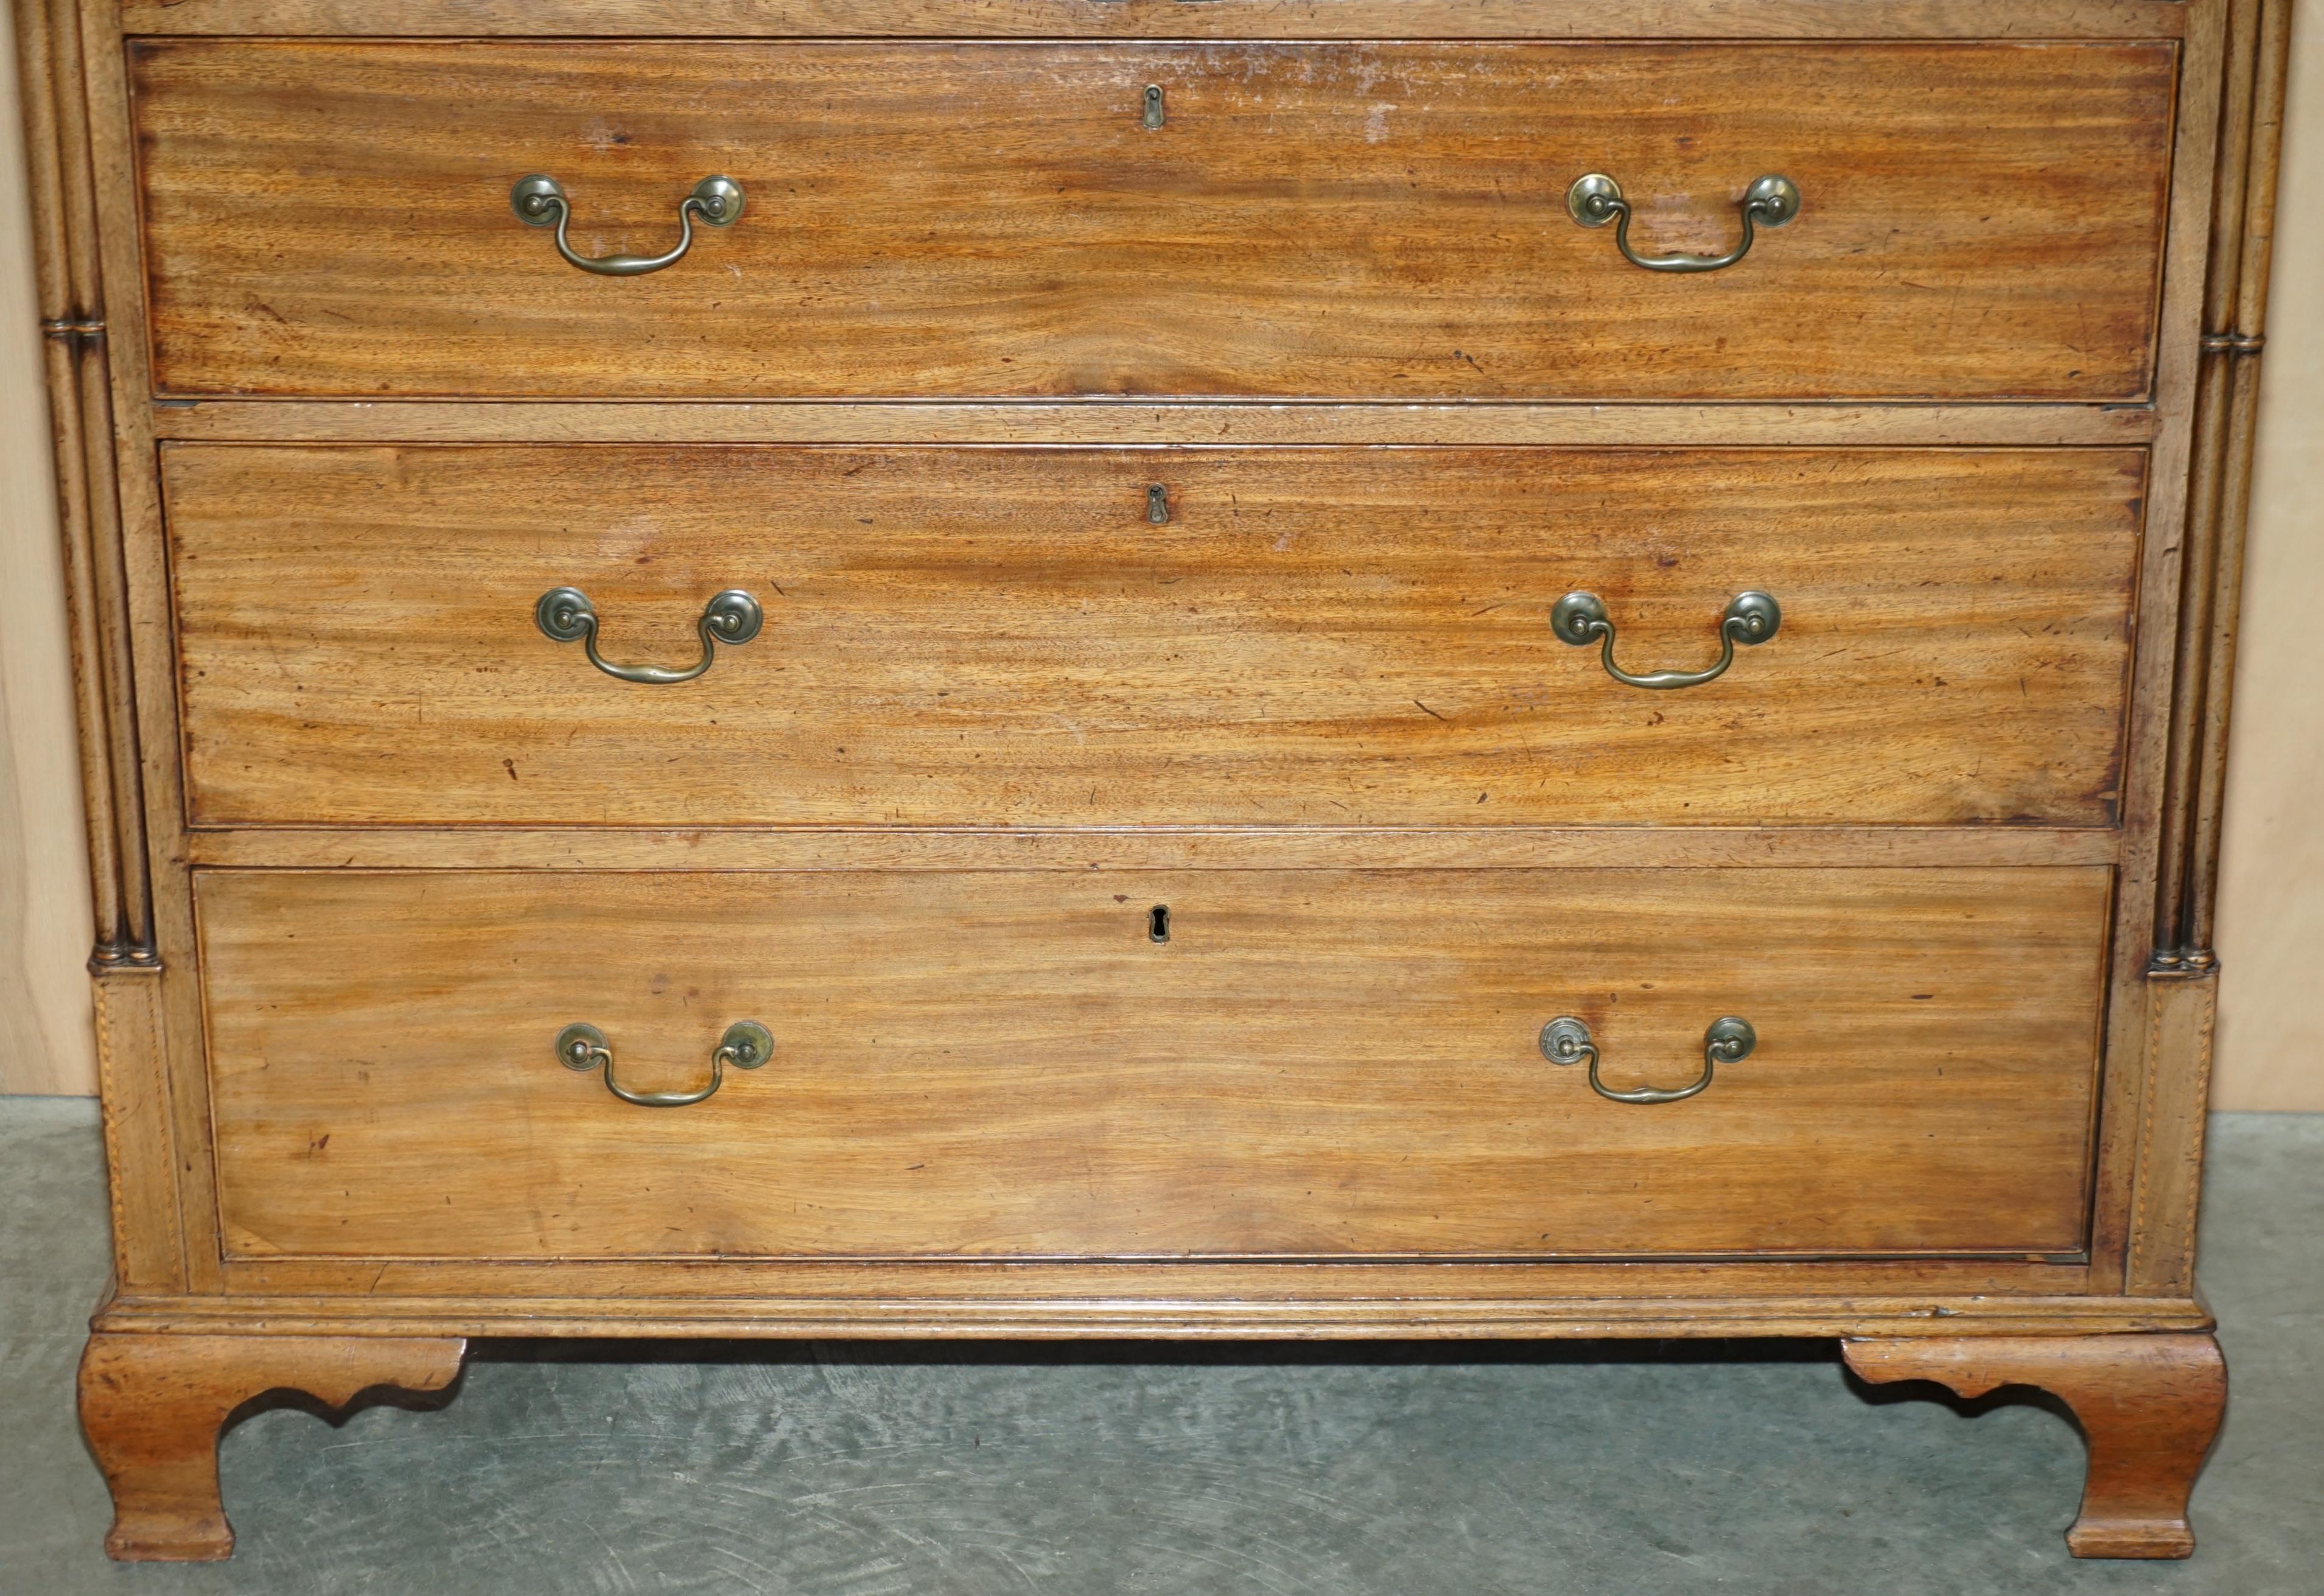 LARGE FiNE ANTIQUE THOMAS CHIPPENDALE SHERATON REVIVAL HARDWOOD CHEST OF DRAWERS im Angebot 2